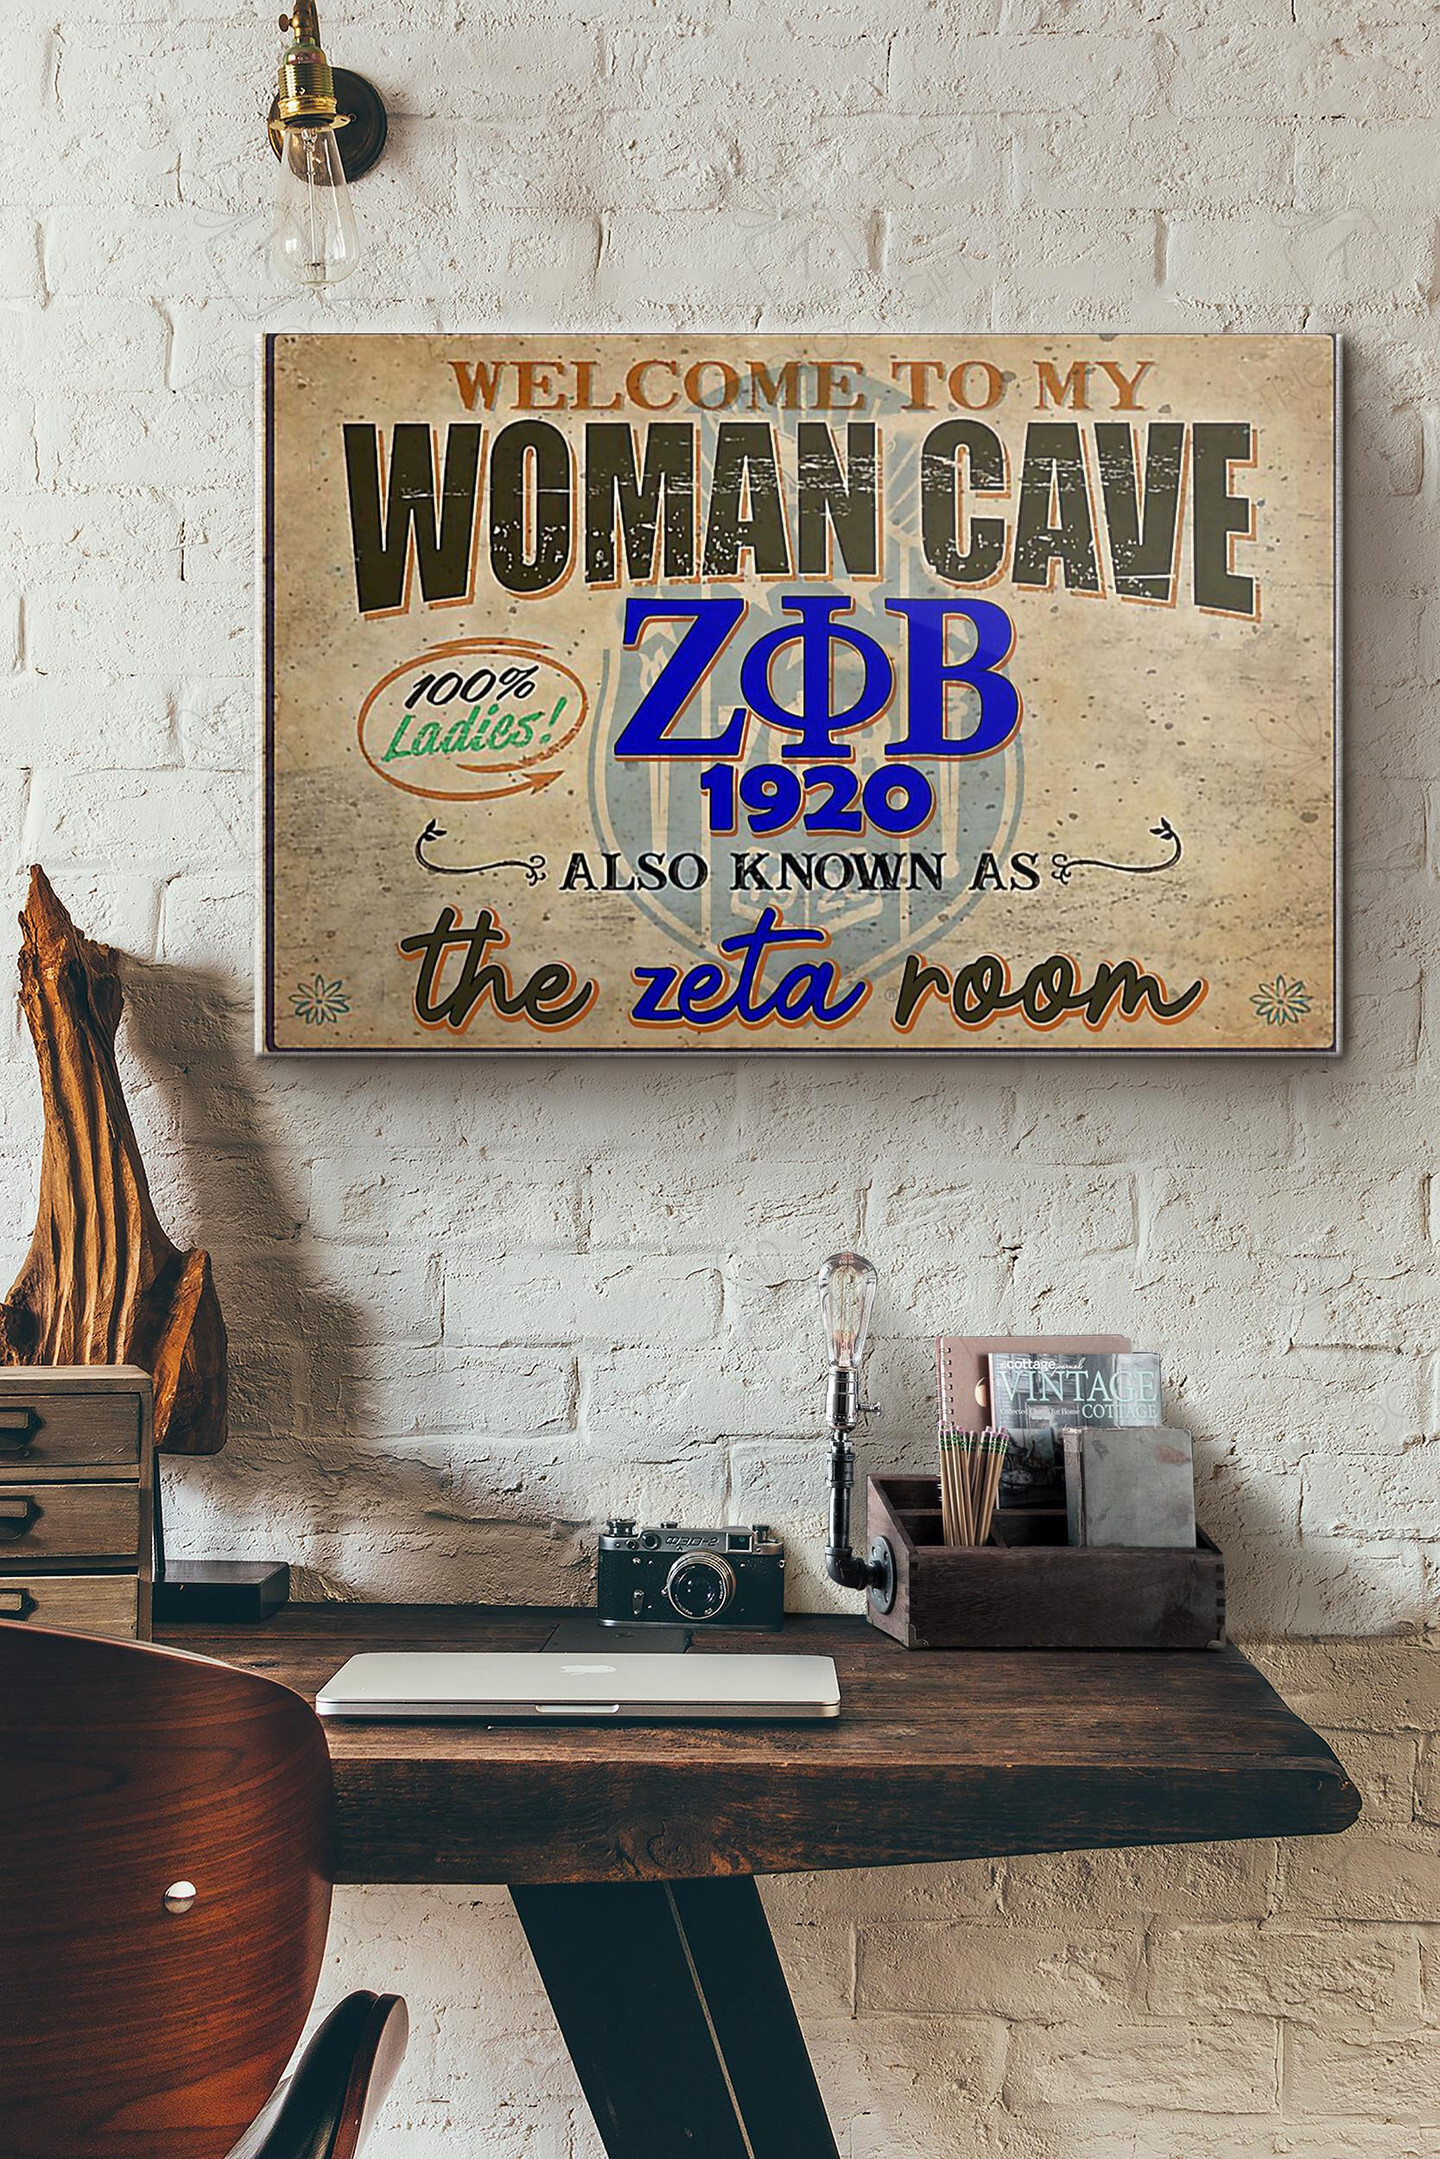 Welcome To My Woman Cave Zetphi Bet1920 Canvas Painting Ideas, Canvas Hanging Prints, Gift Idea Framed Prints, Canvas Paintings Wrapped Canvas 8x10